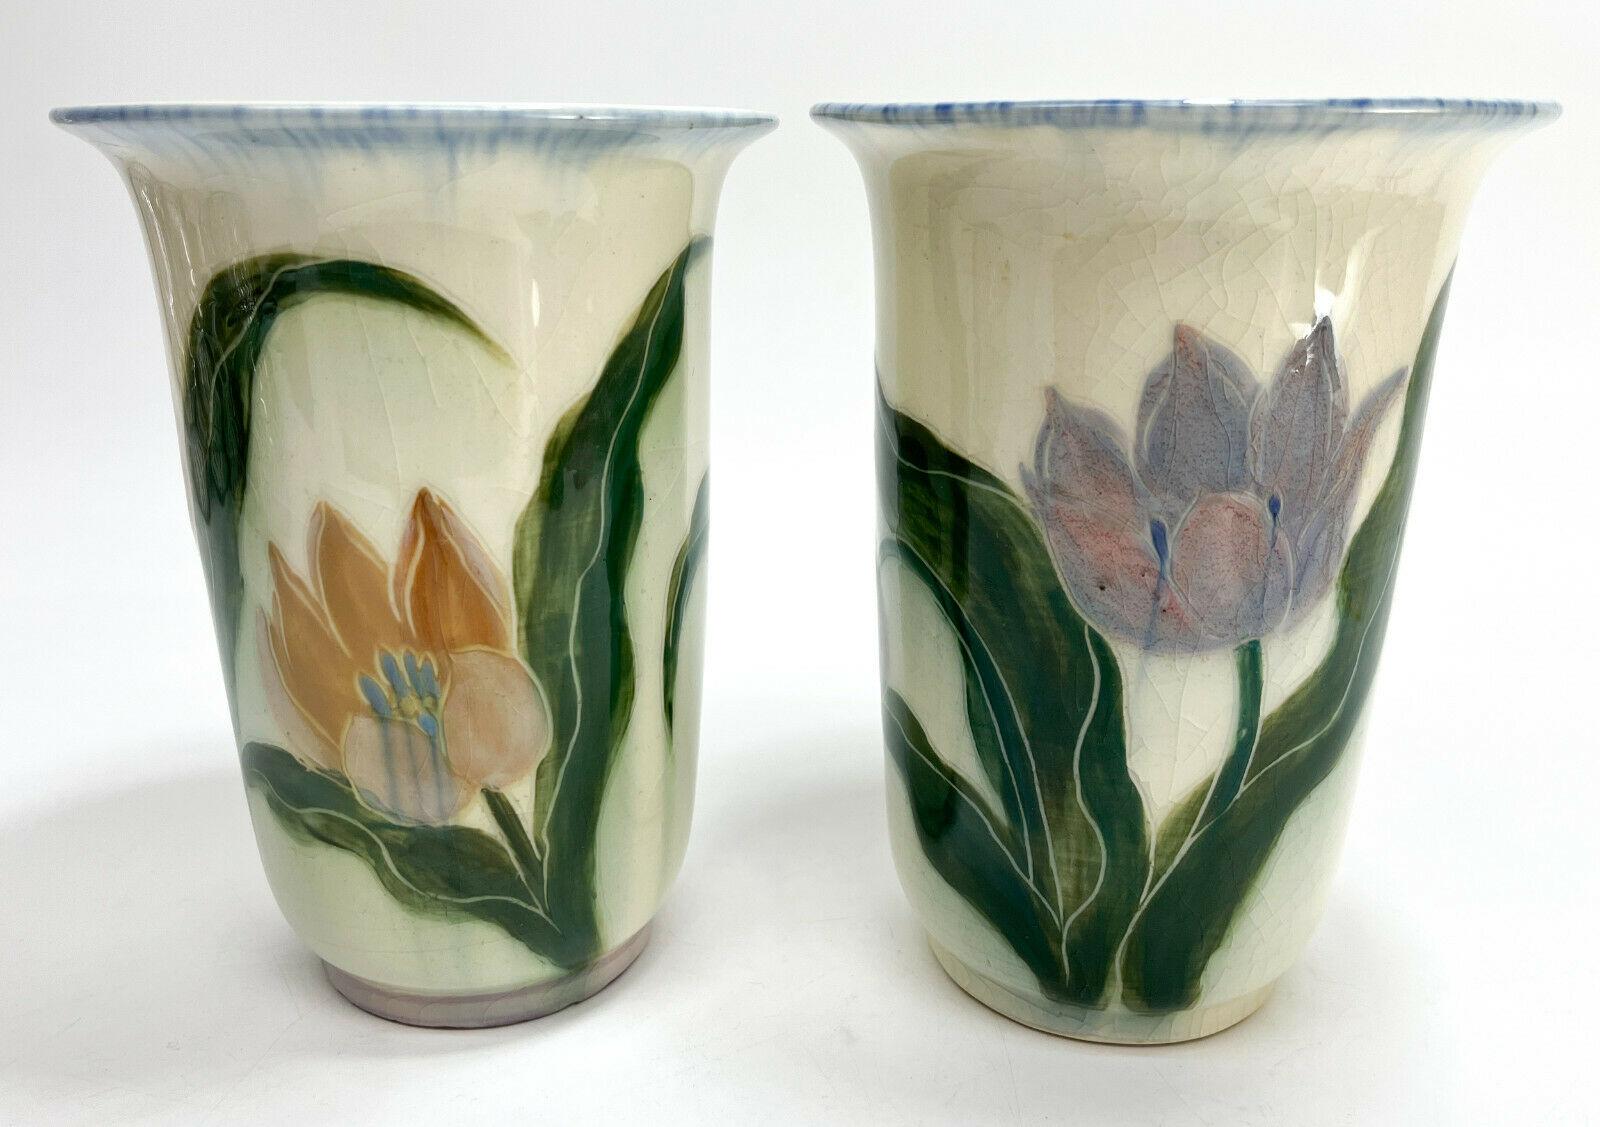 Hand-Painted Pair of Rookwood Pottery Vases by E.T. Hurley #6806, Hand Painted Tulips, 1943 For Sale